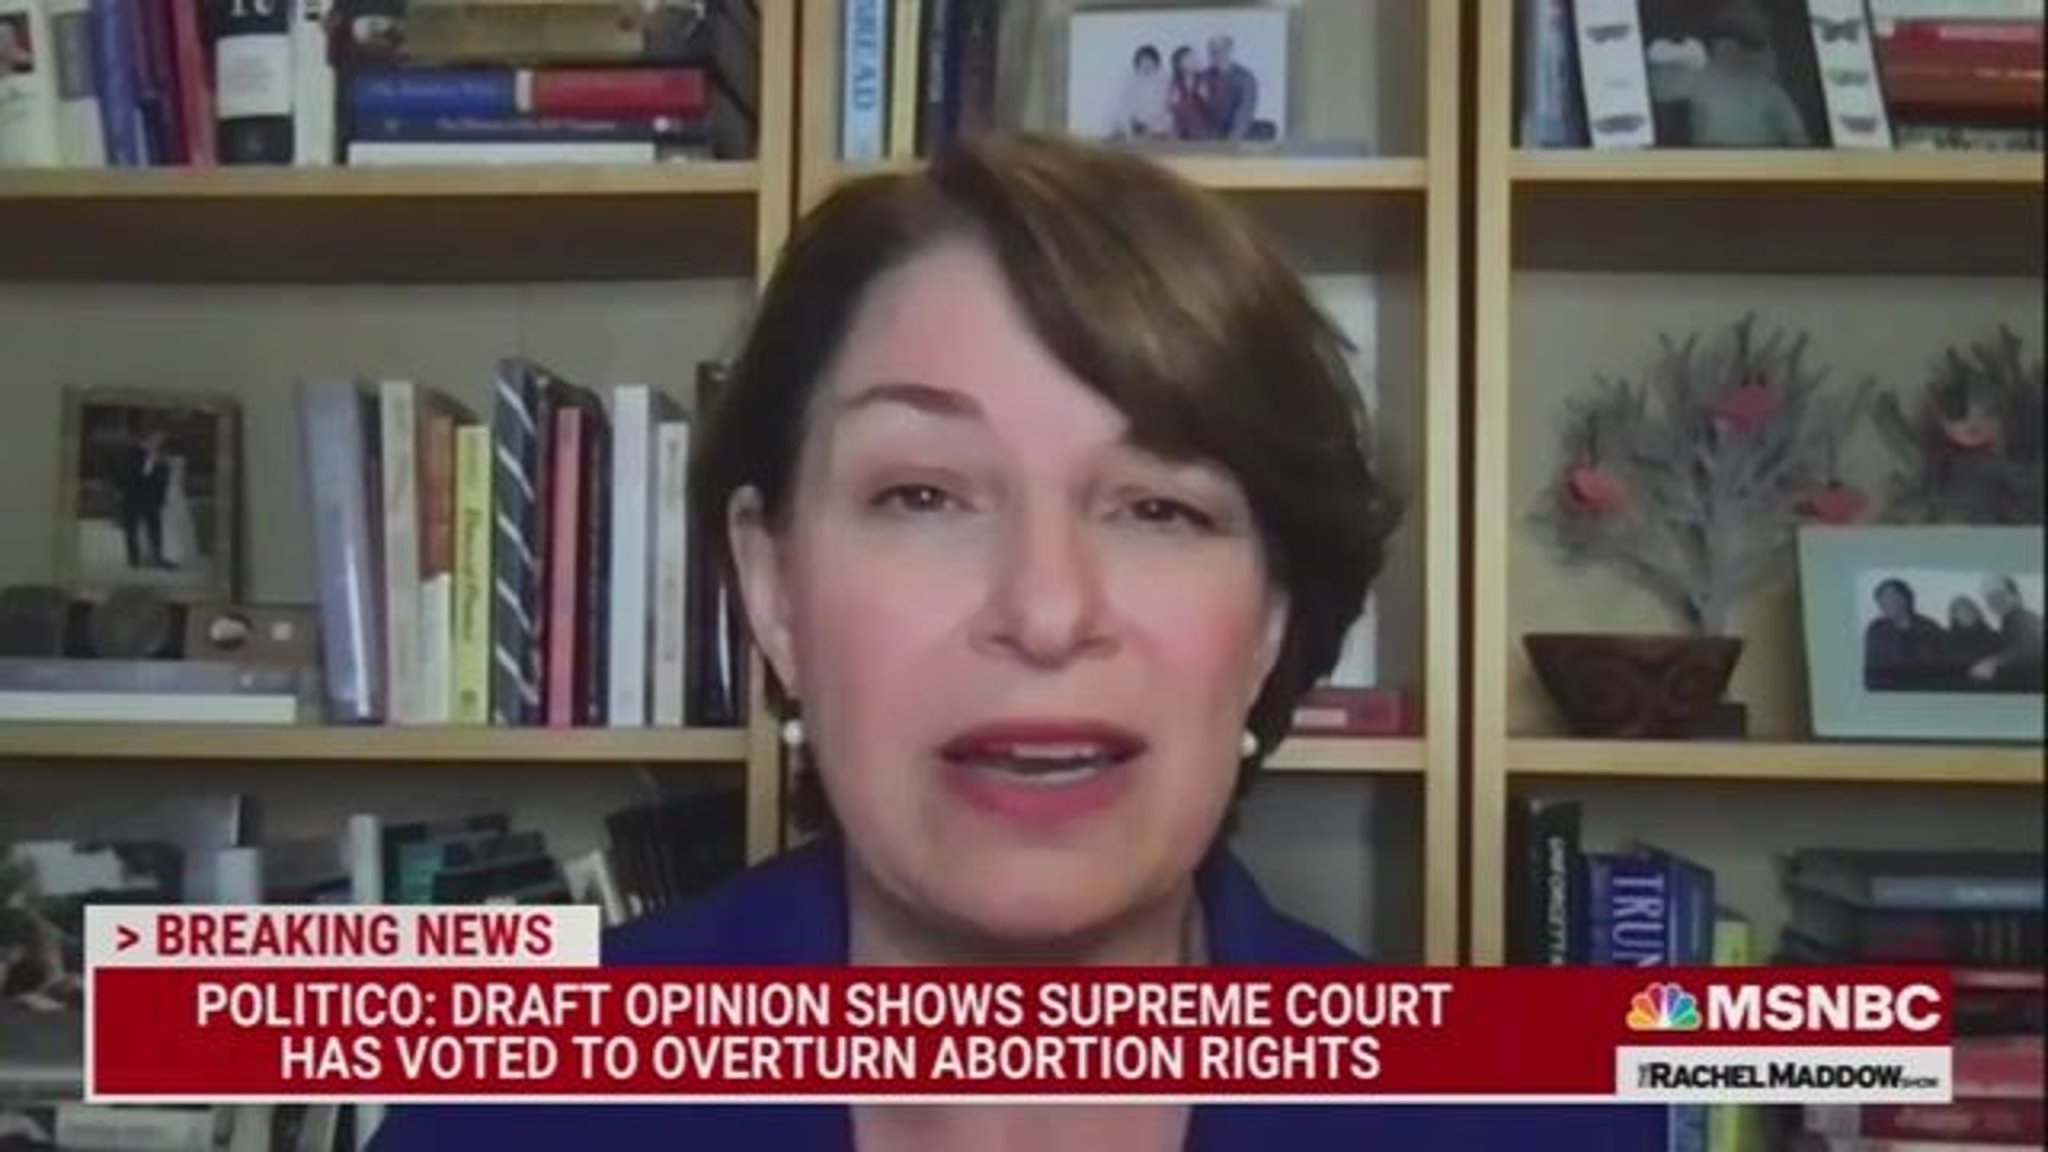 Sen. Amy Klobuchar (D-MN) reacts to SCOTUS reportedly getting ready to overturn Roe v. Wade.